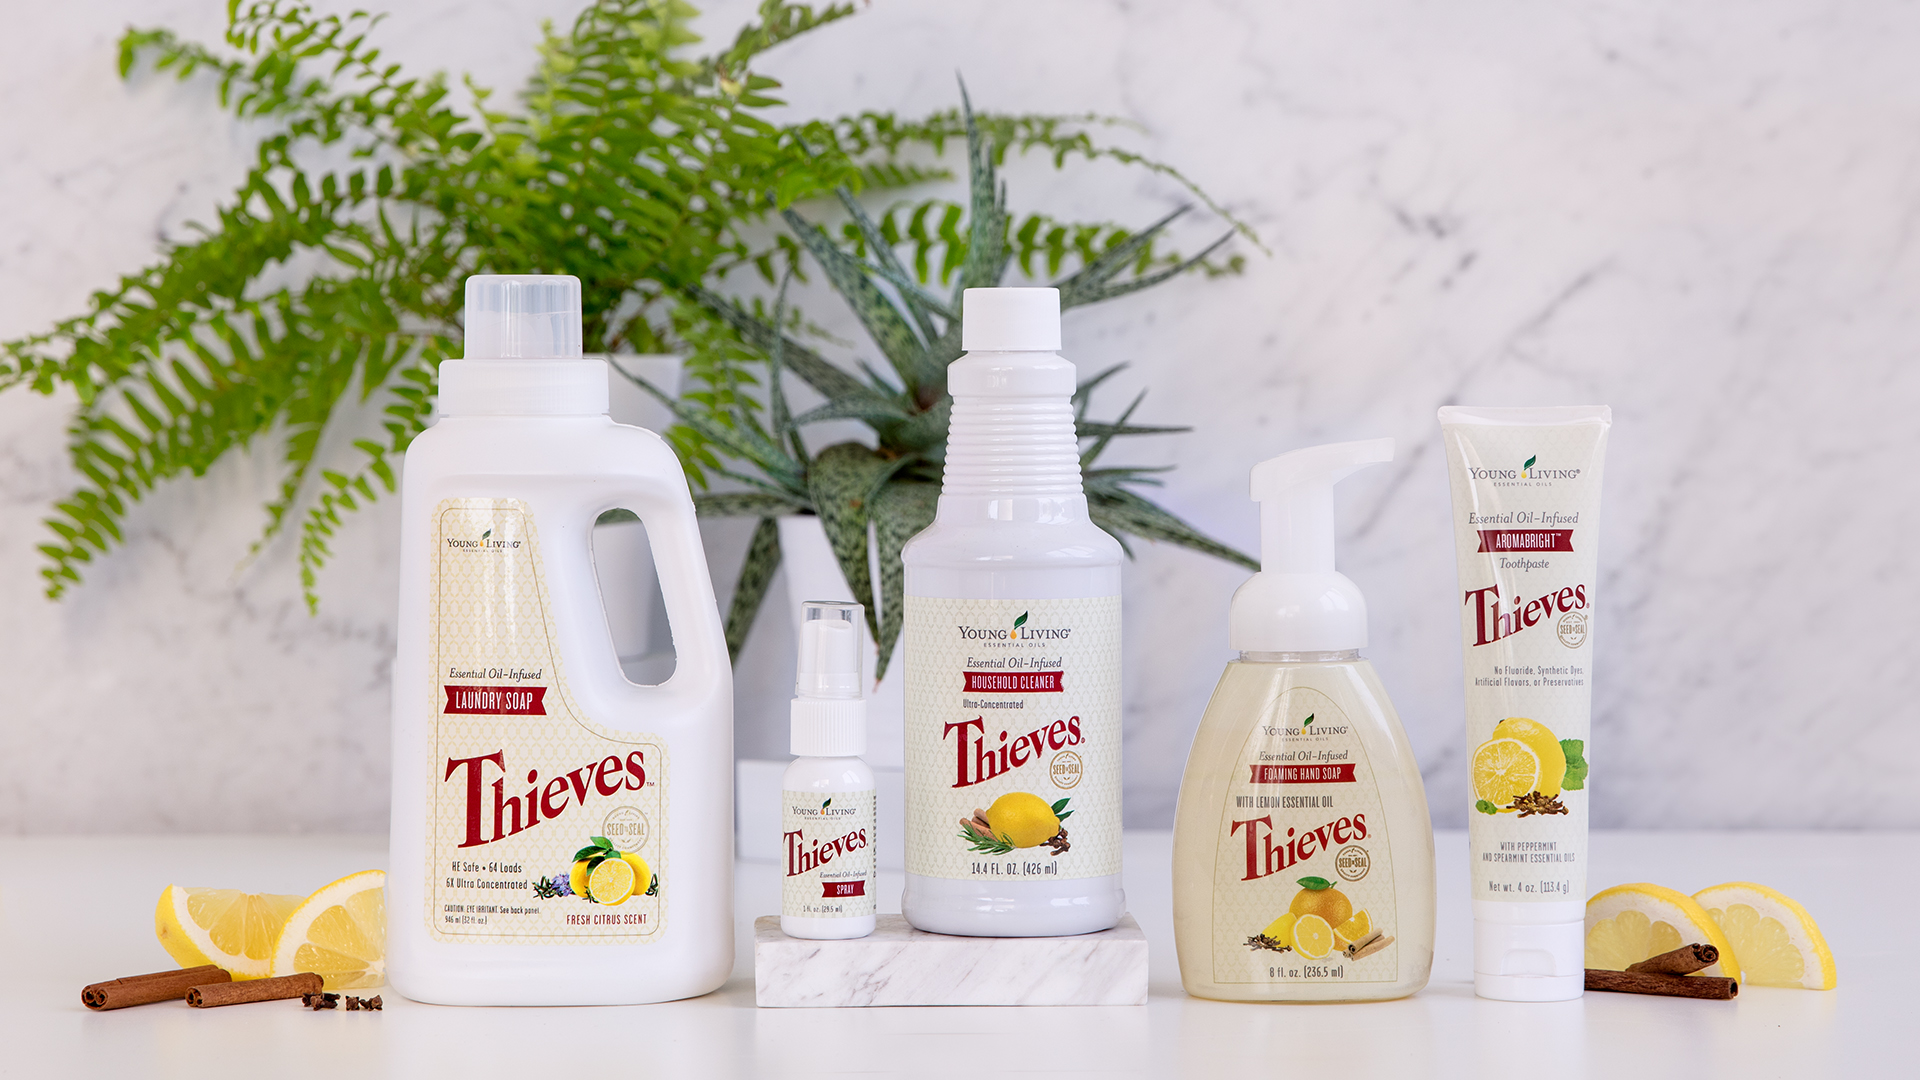 Thieves Household Cleaner 14.4 fl.oz by Young Living Essenital Oils